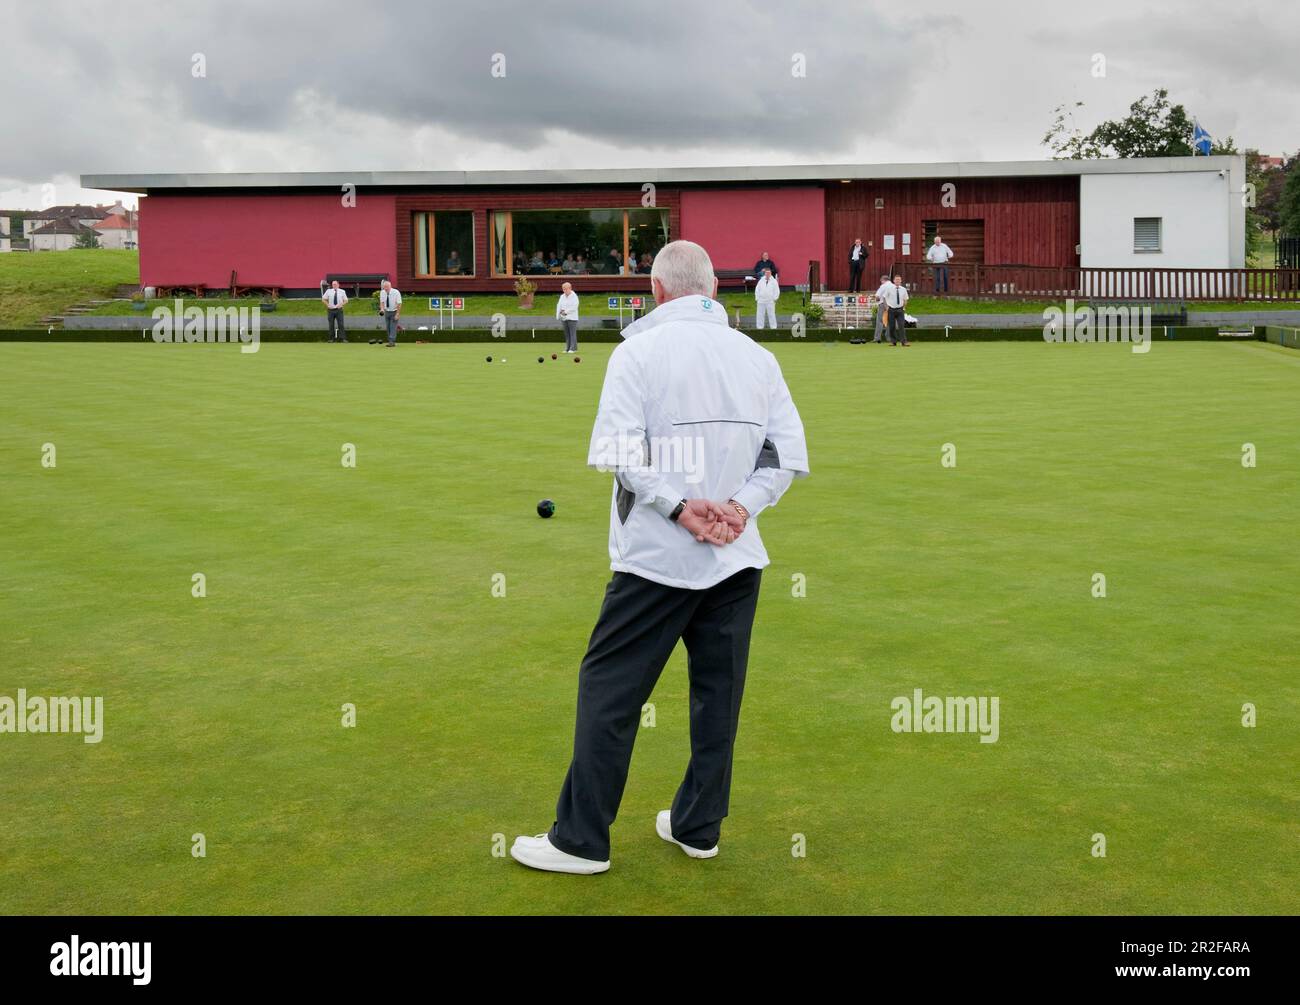 A man stands in the foreground of bowls in play in front of the red pavilion clubhouse at the Balornock lawn bowling green in Glasgow, Scotland, UK Stock Photo